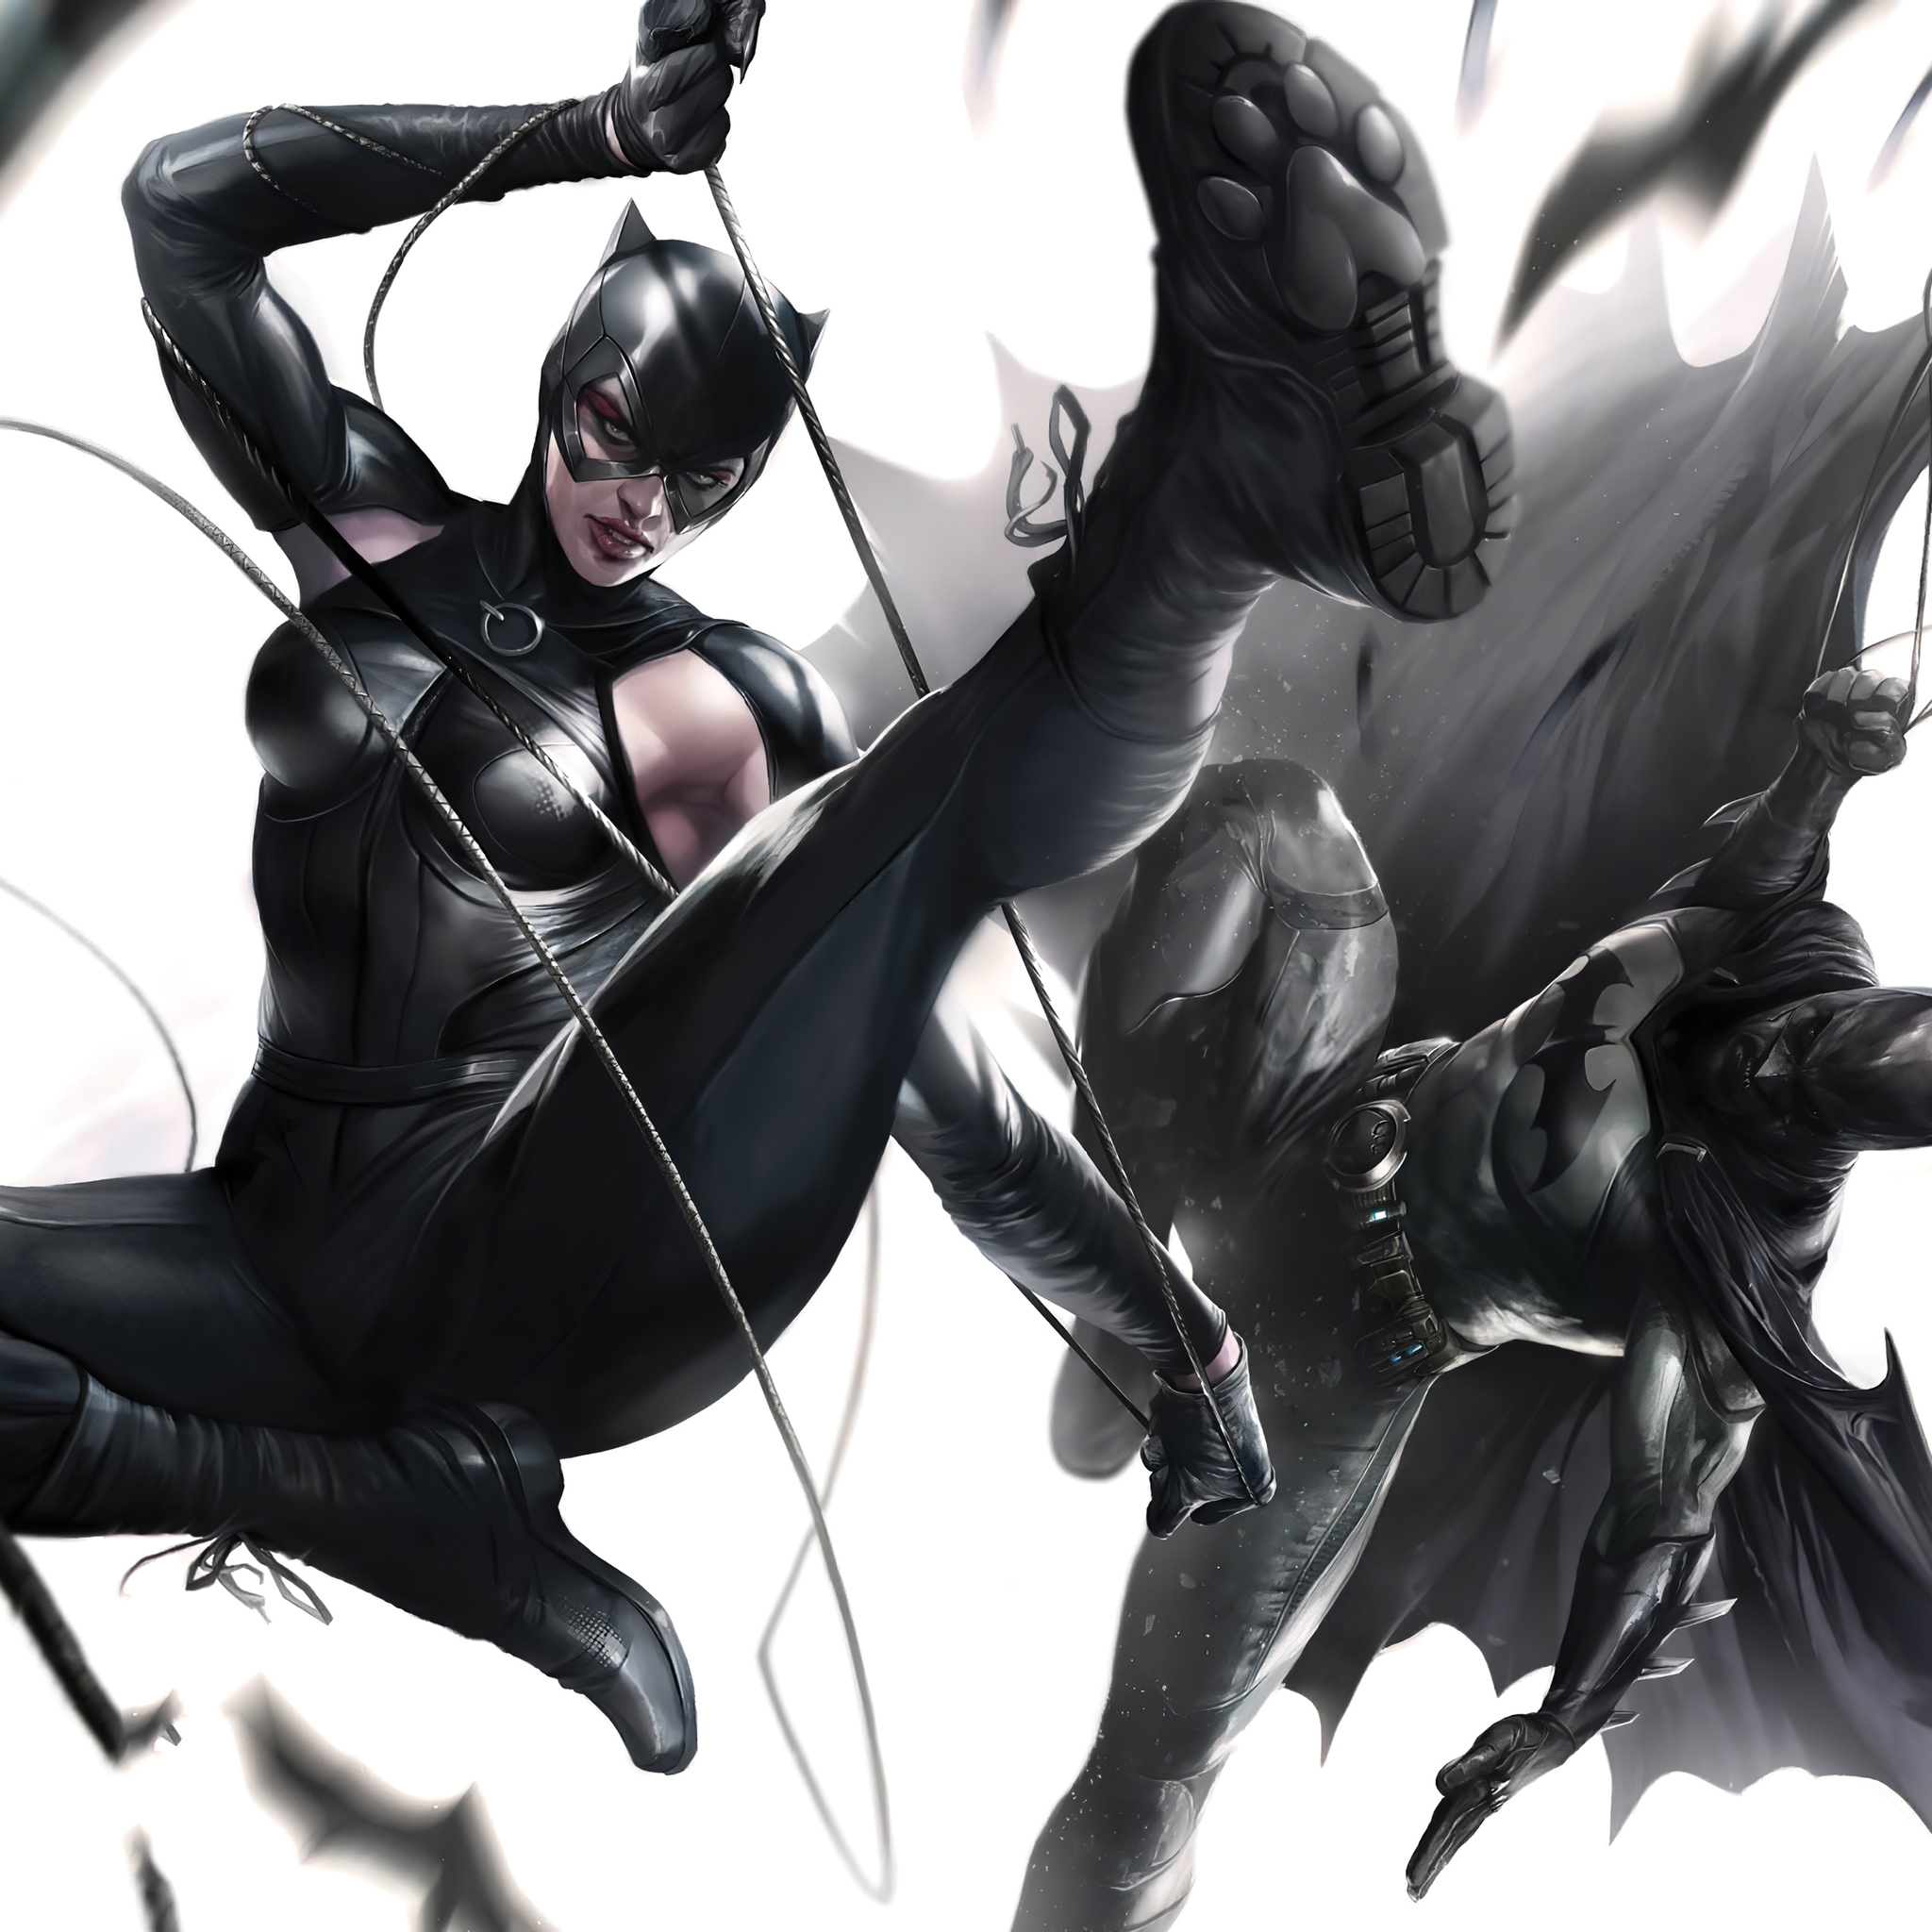 Catwoman And Batman In 2048x2048 Resolution. catwoman-and-batman-gv.jpg. 